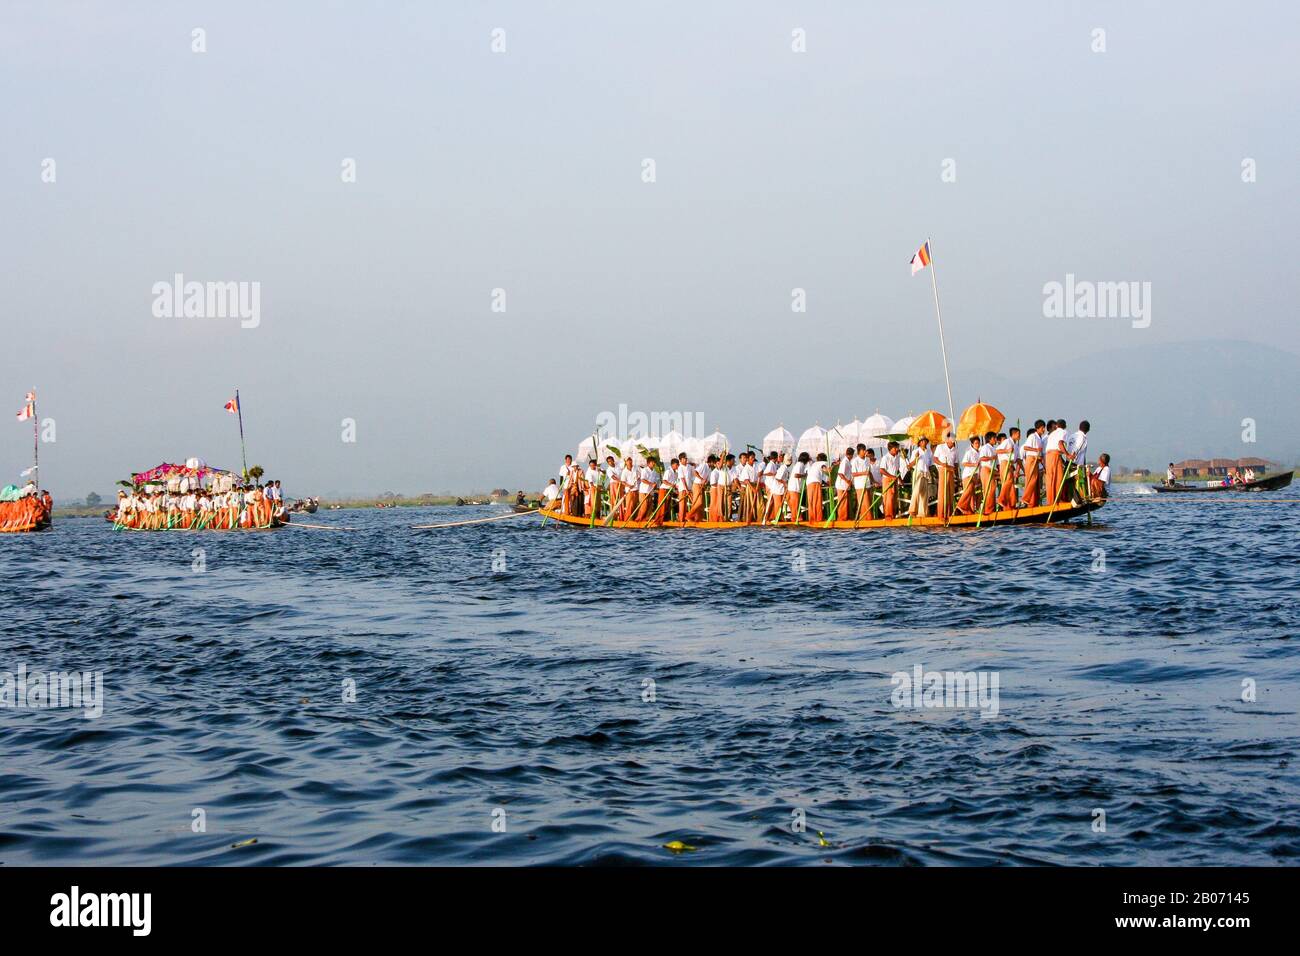 Traditional rowing boat in Burma (rowers push rowing with their feet) Inle Lake Stock Photo